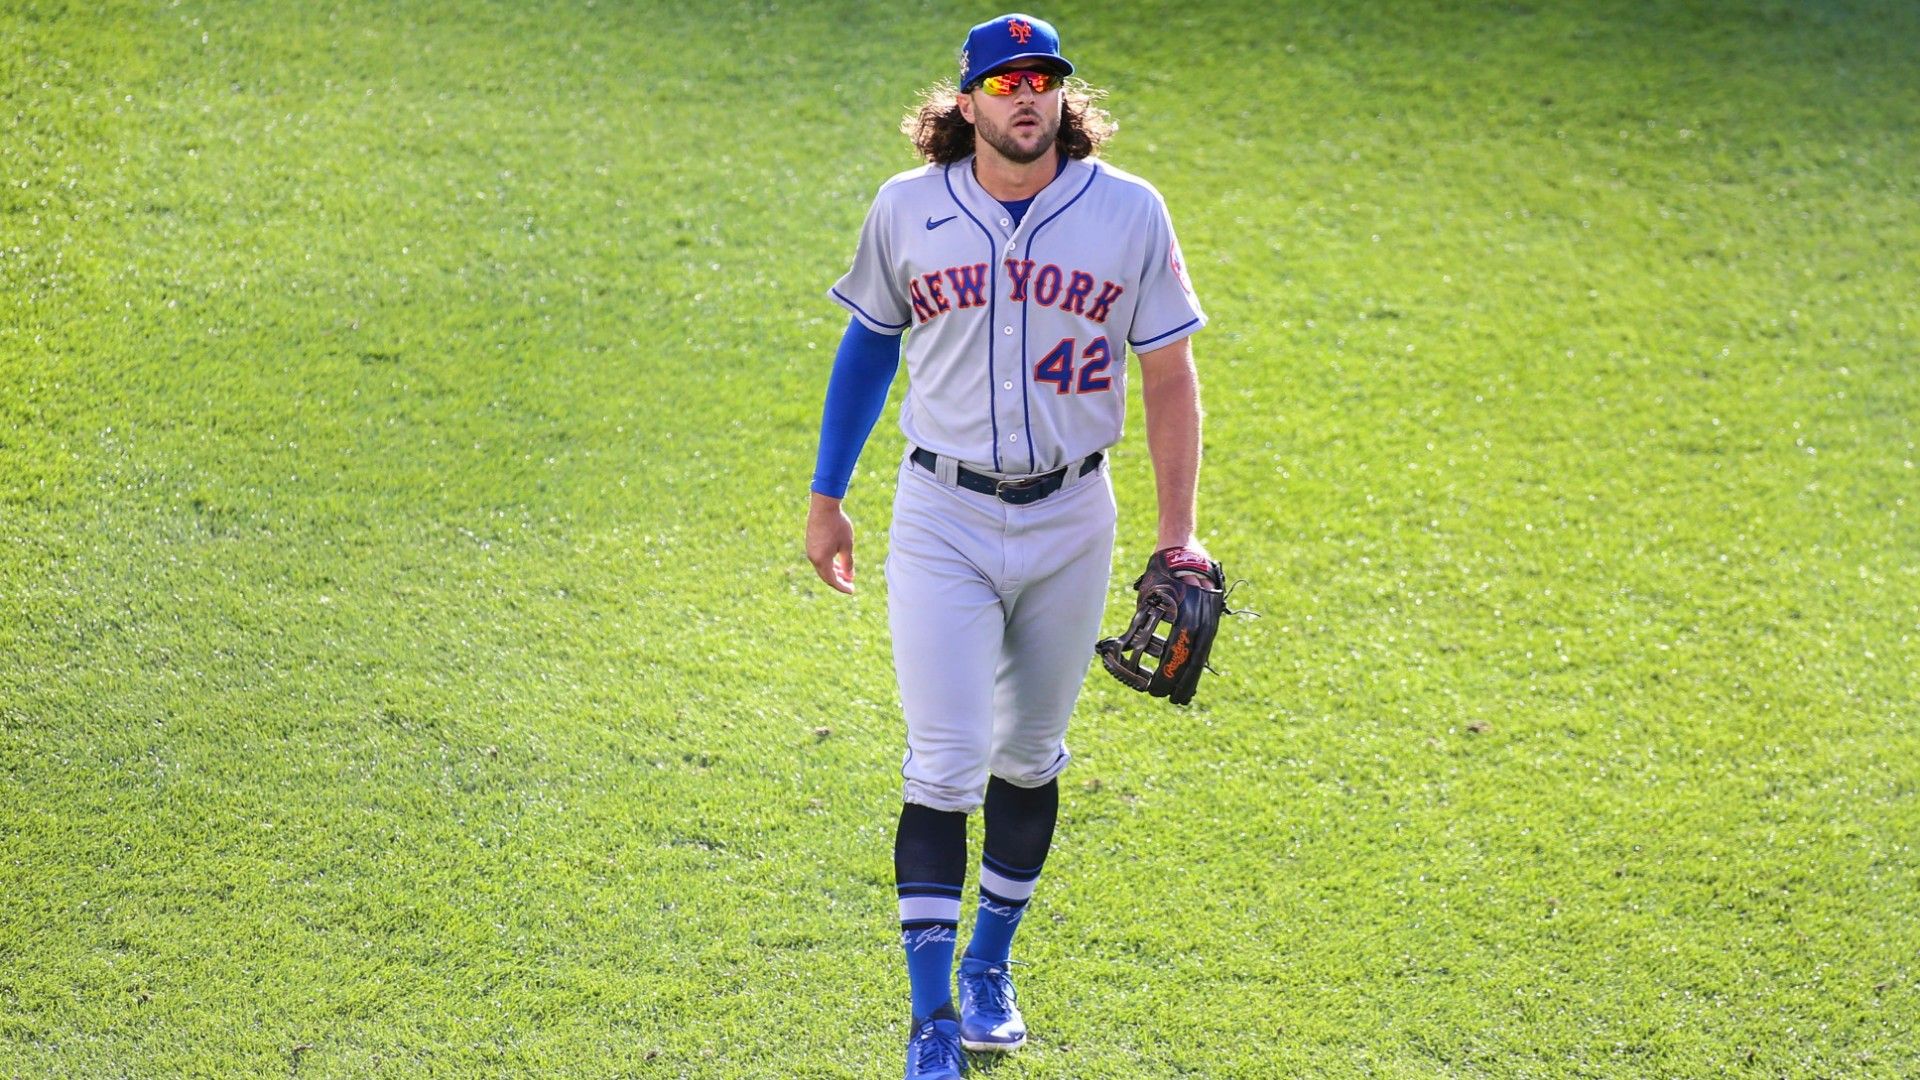 Cubs to tag aged Mets centerfielder Jake Marisnick